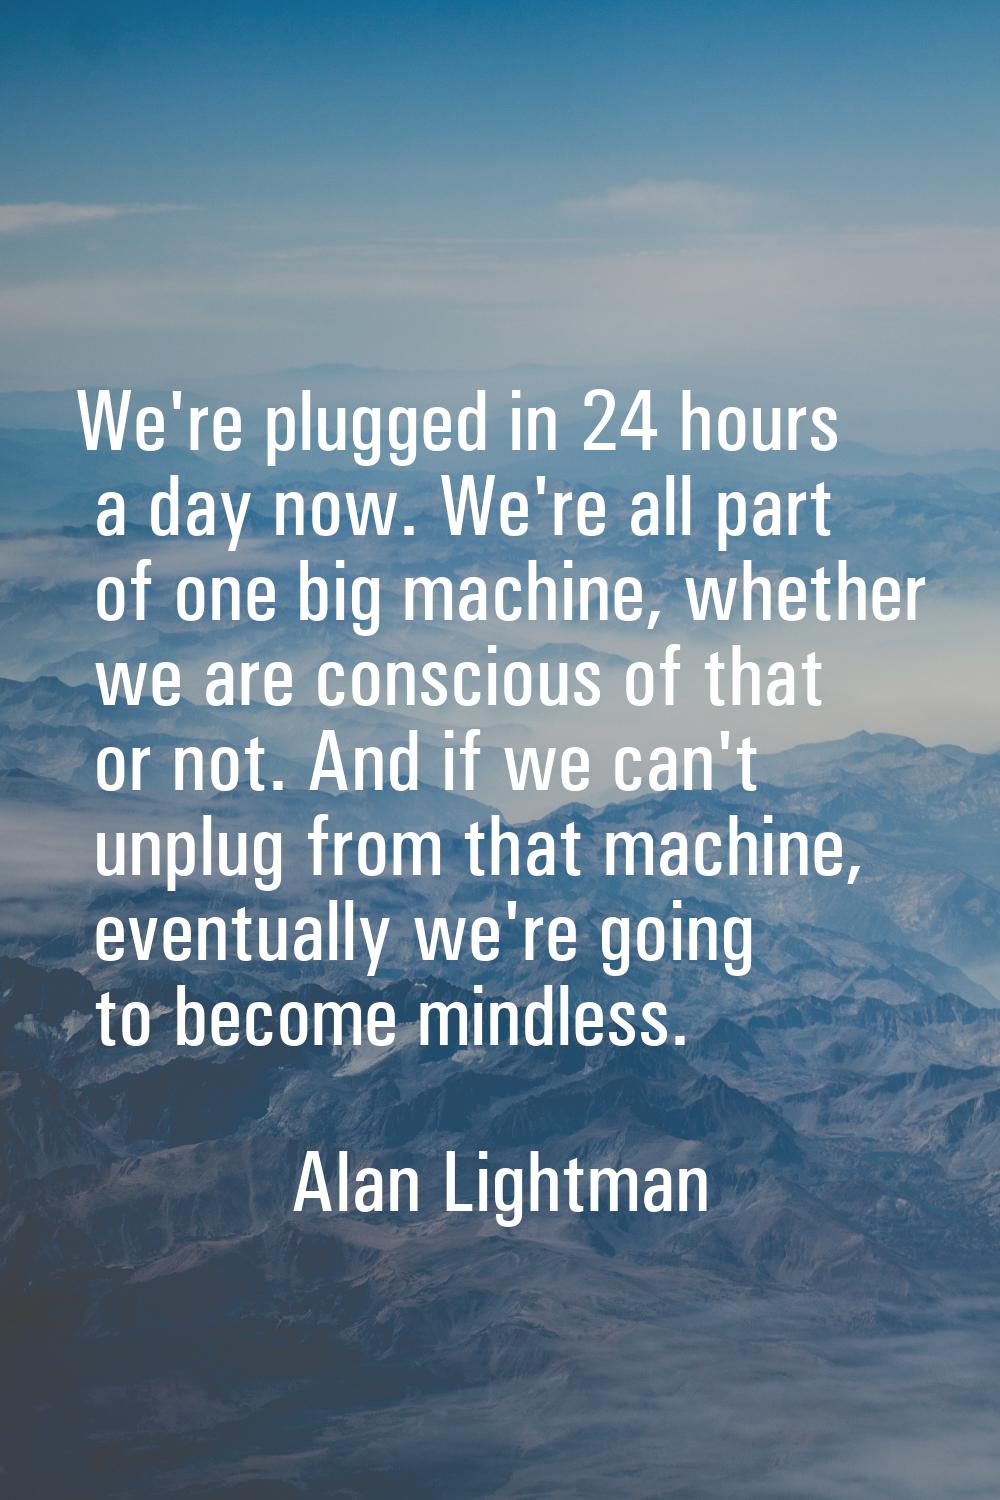 We're plugged in 24 hours a day now. We're all part of one big machine, whether we are conscious of